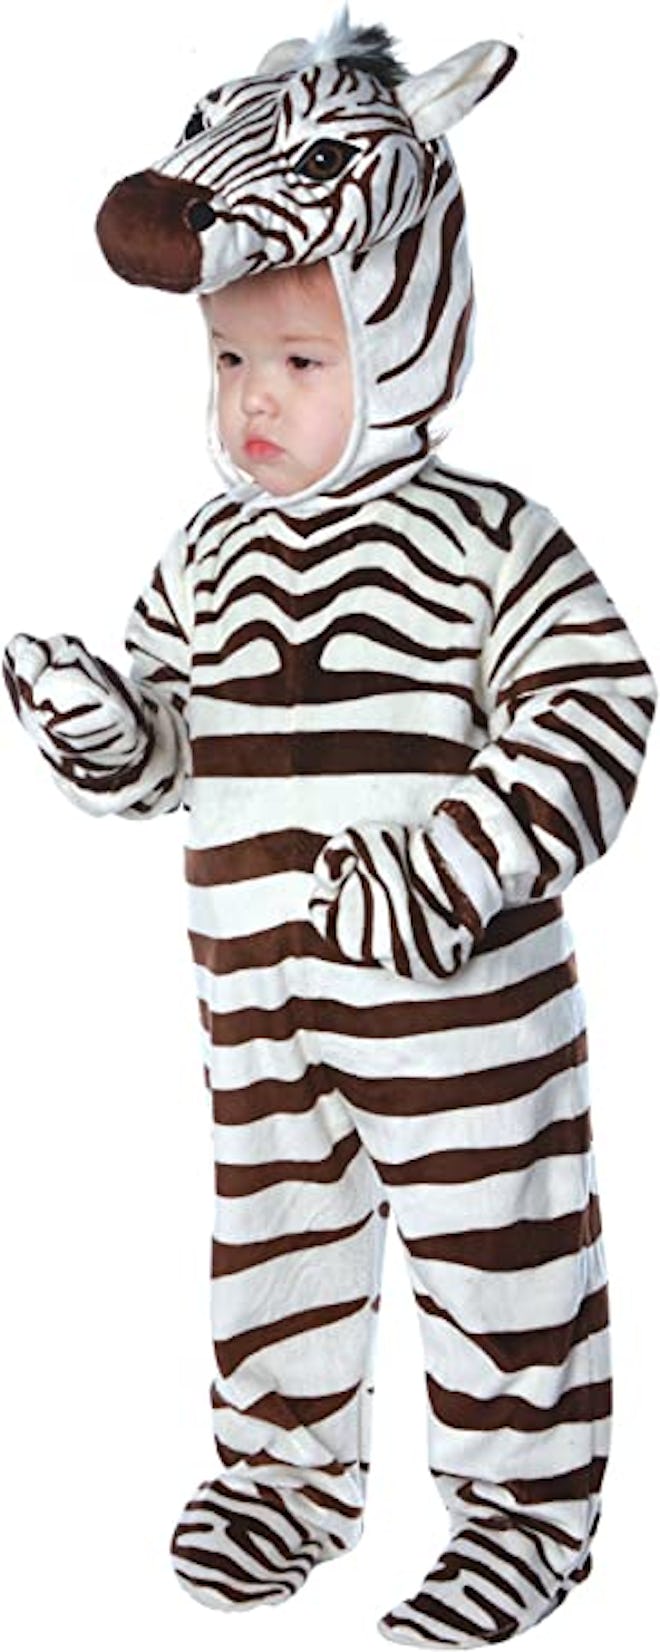 Why not pick a zebra jumpsuit for a baby and dog Halloween costume?